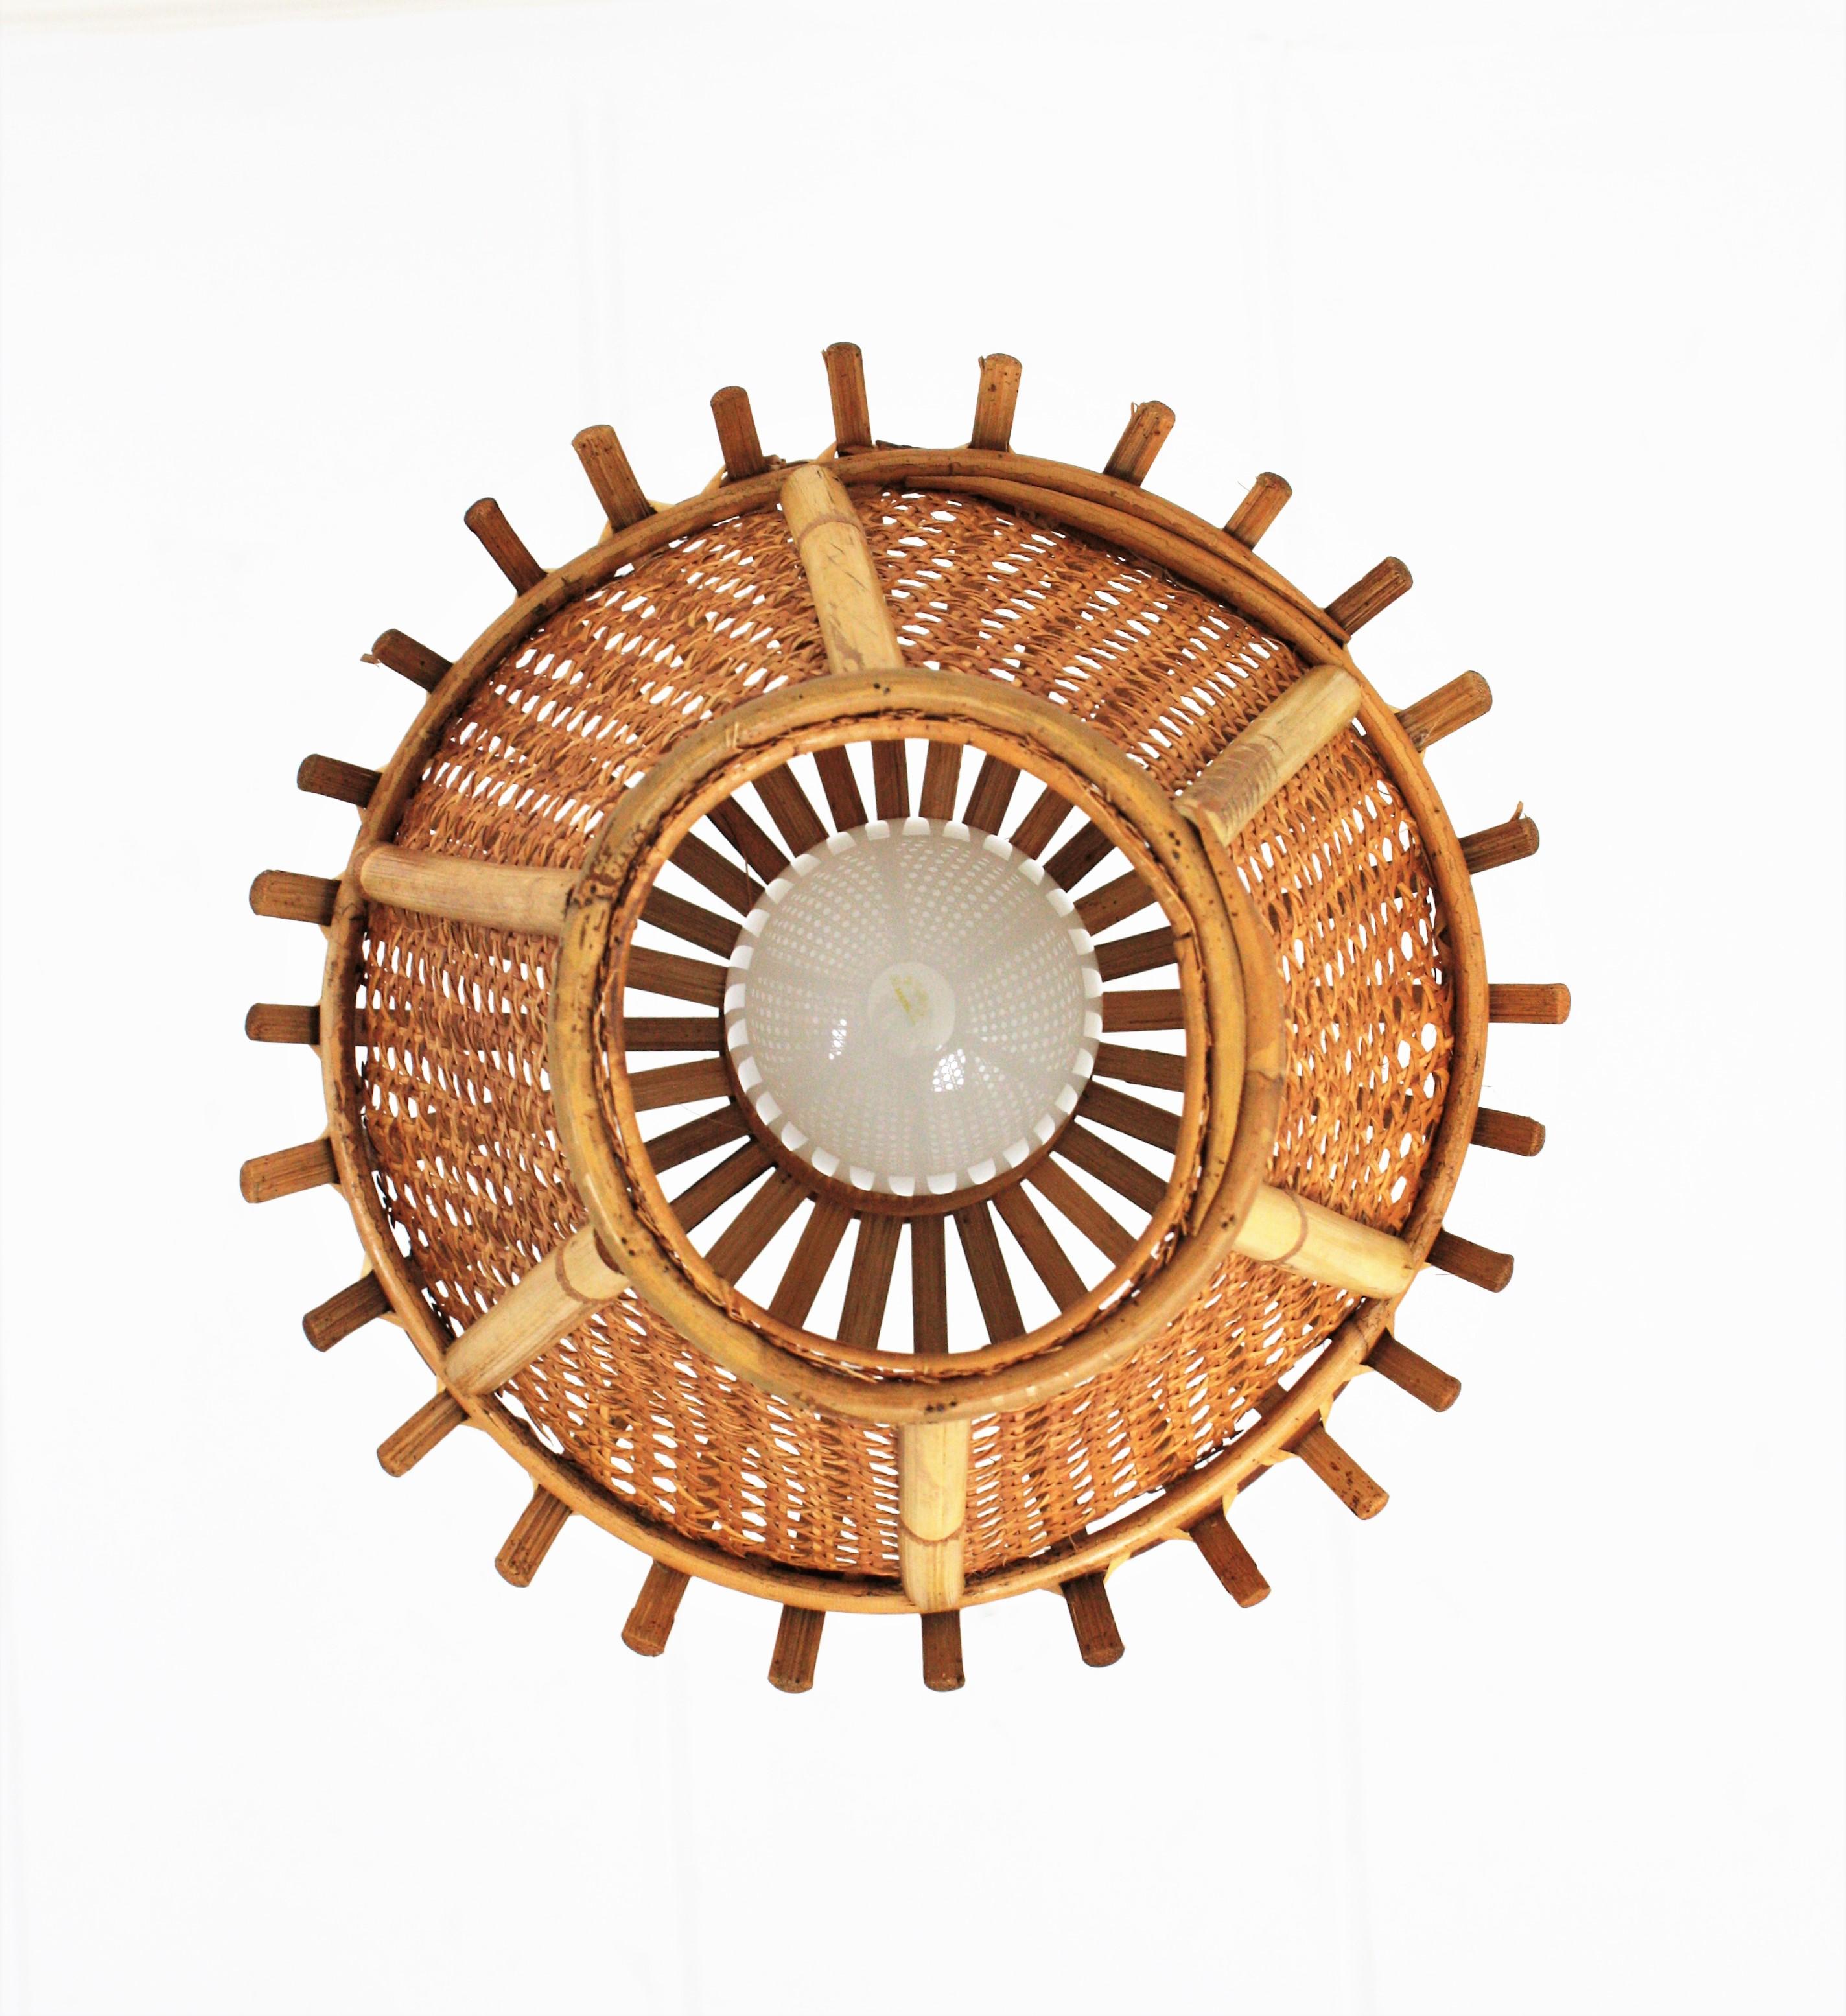 Italian Modernist Rattan and Wicker Wire Pagoda Pendant or Hanging Light, 1960s For Sale 5